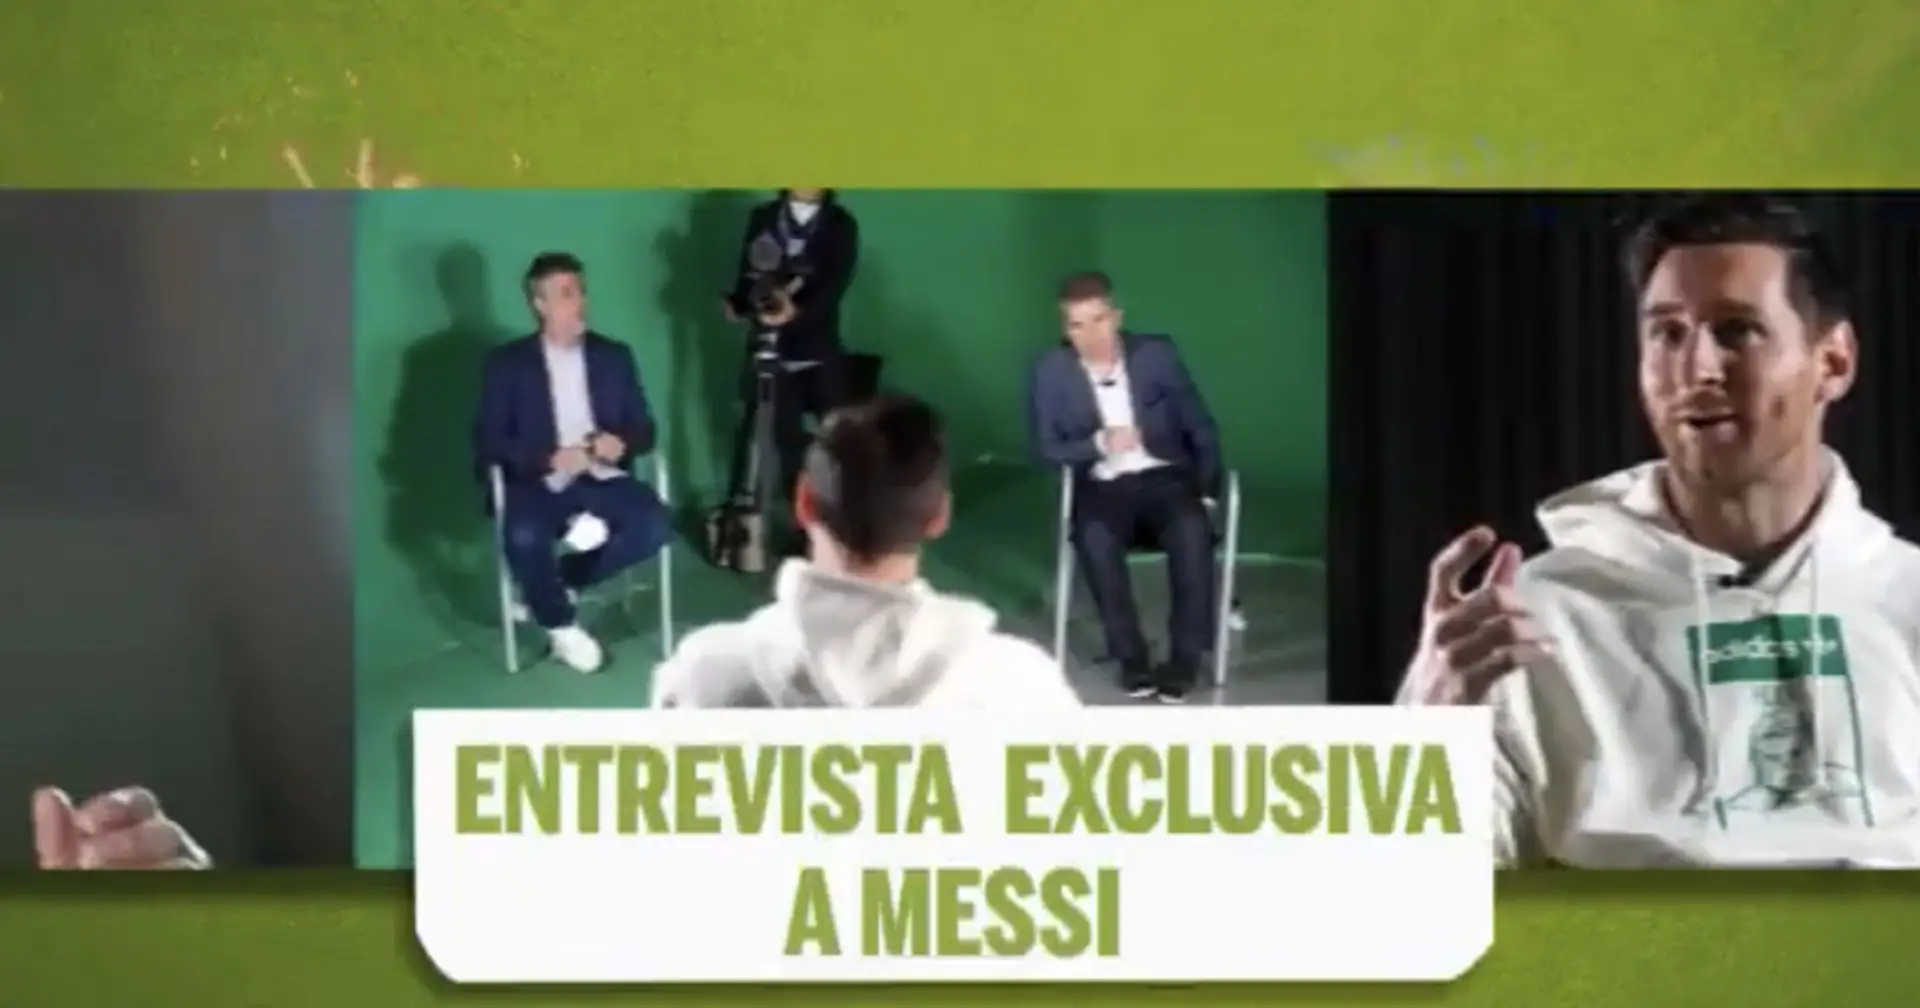 Future update incoming? Leo Messi's exclusive interview to be released on Saturday